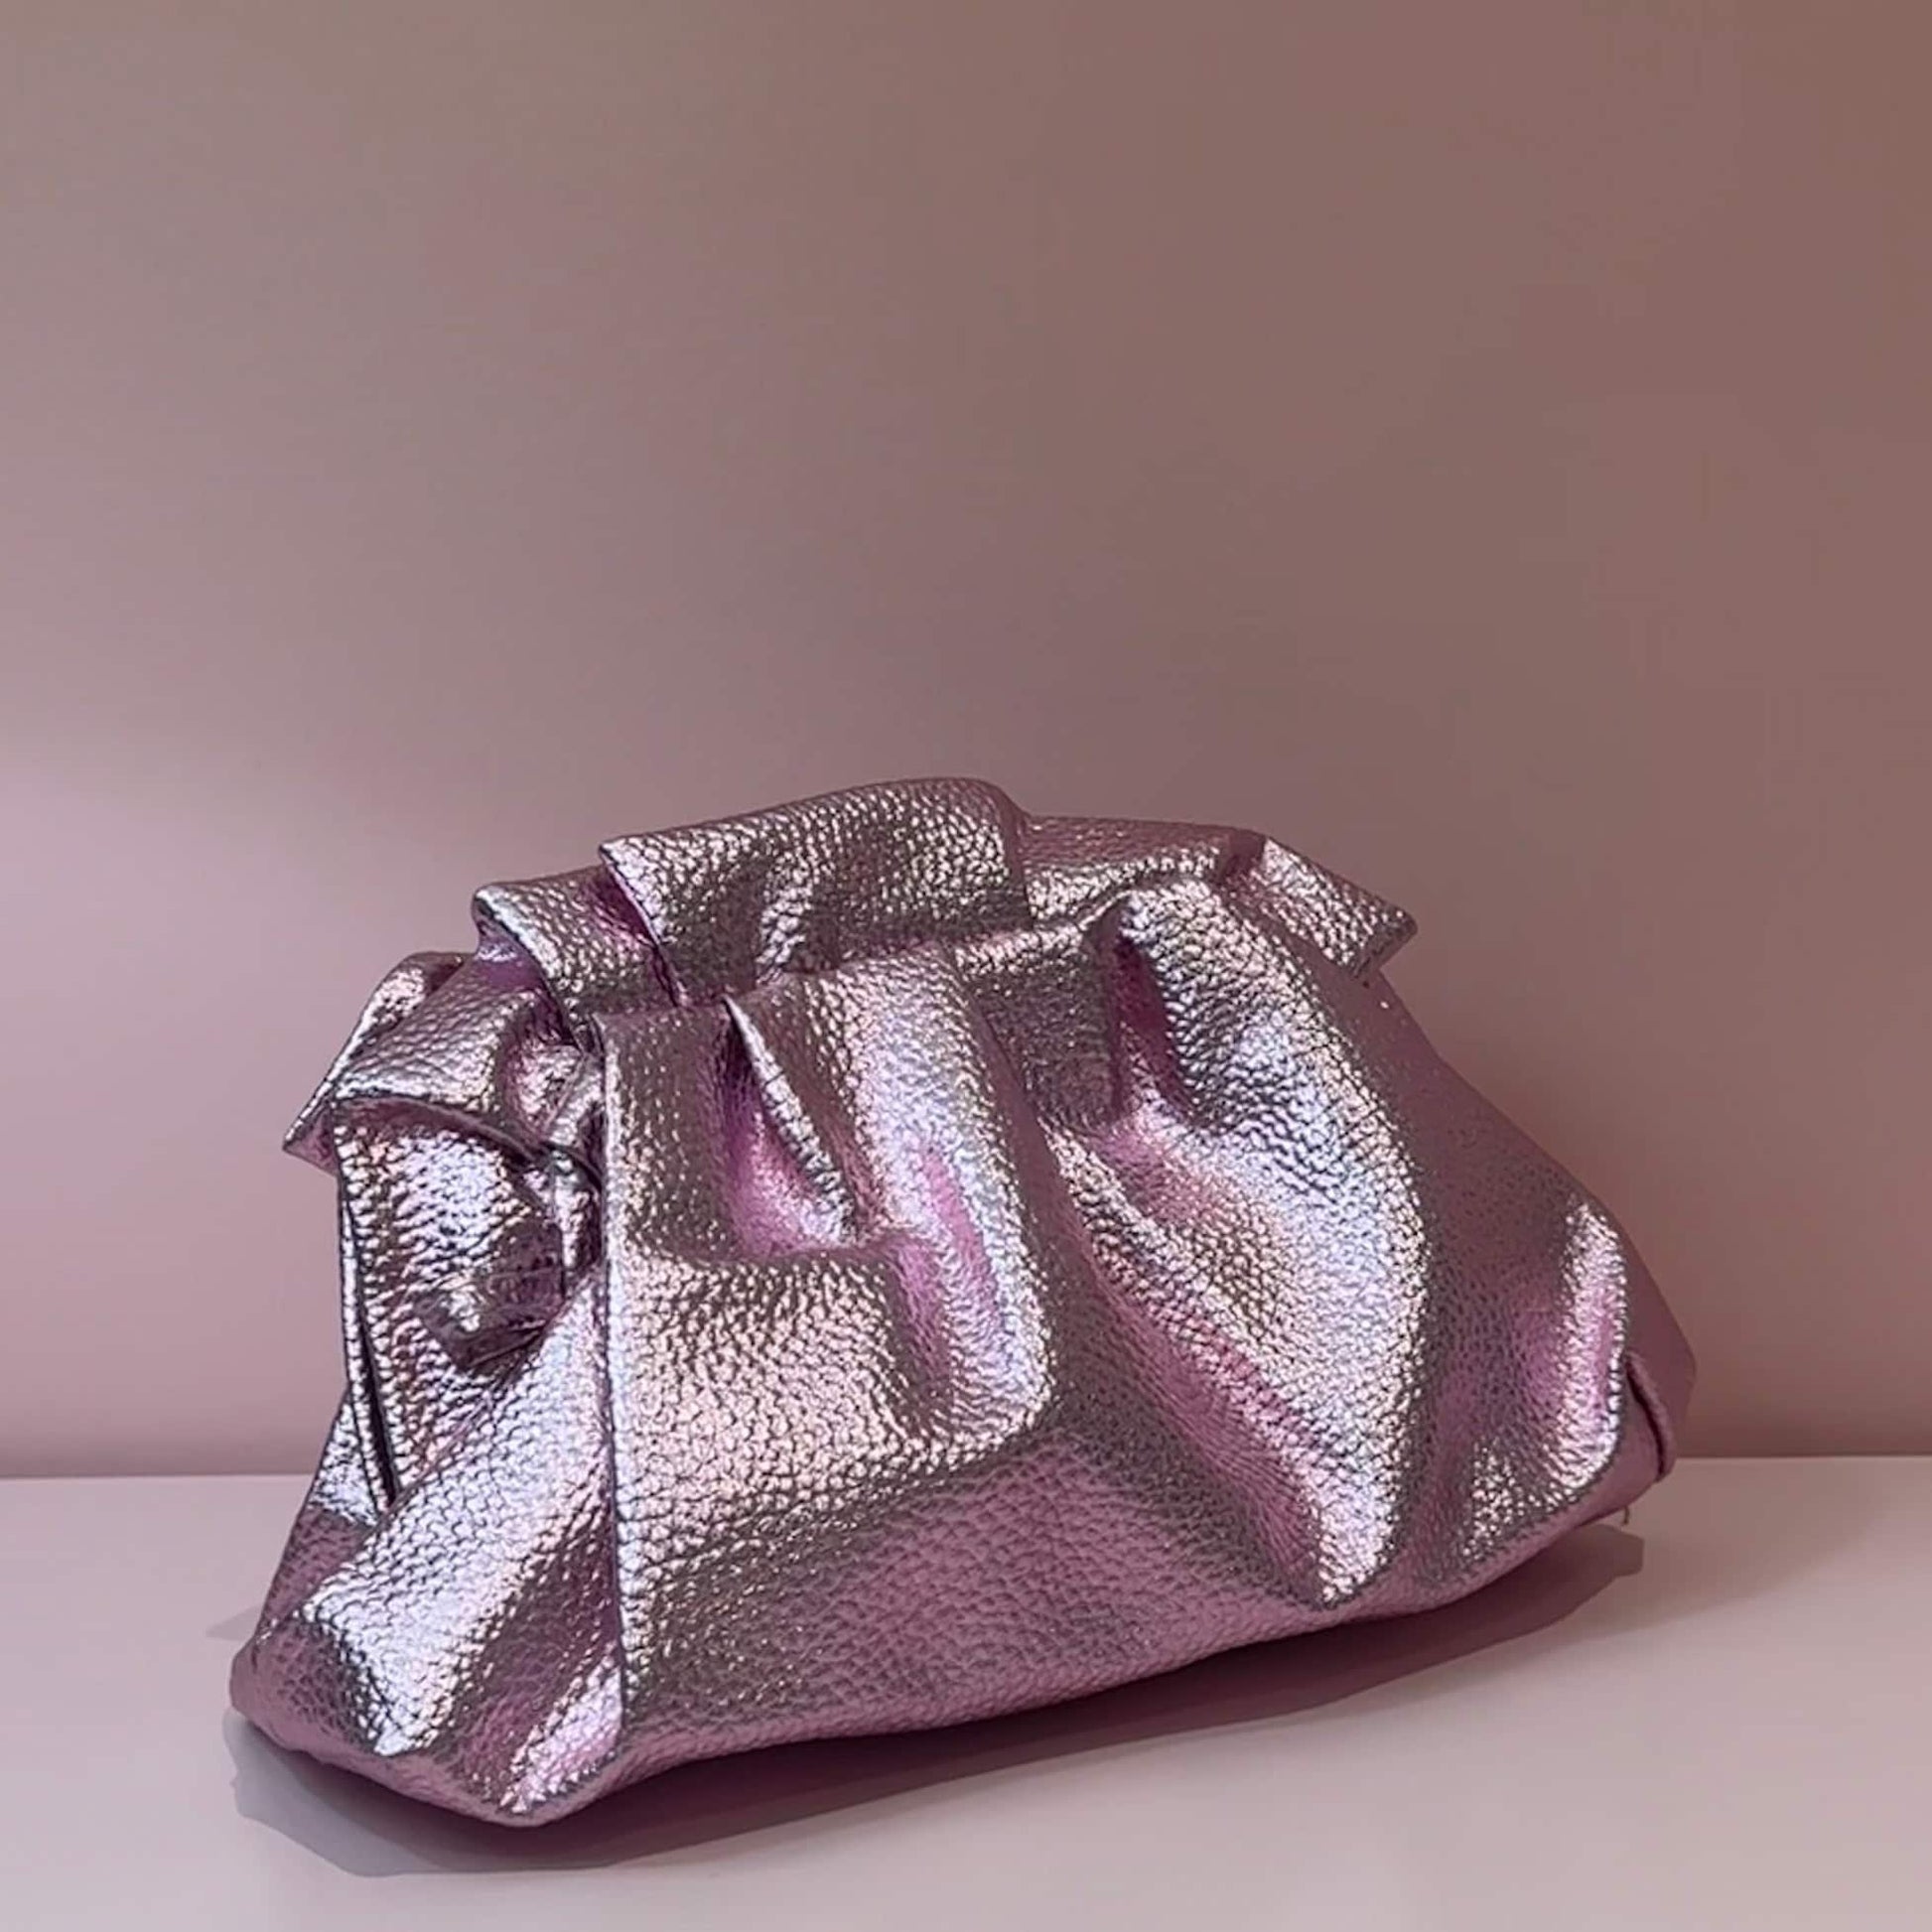 MILACCOLLECTION Cloud Pink Clutch Bag